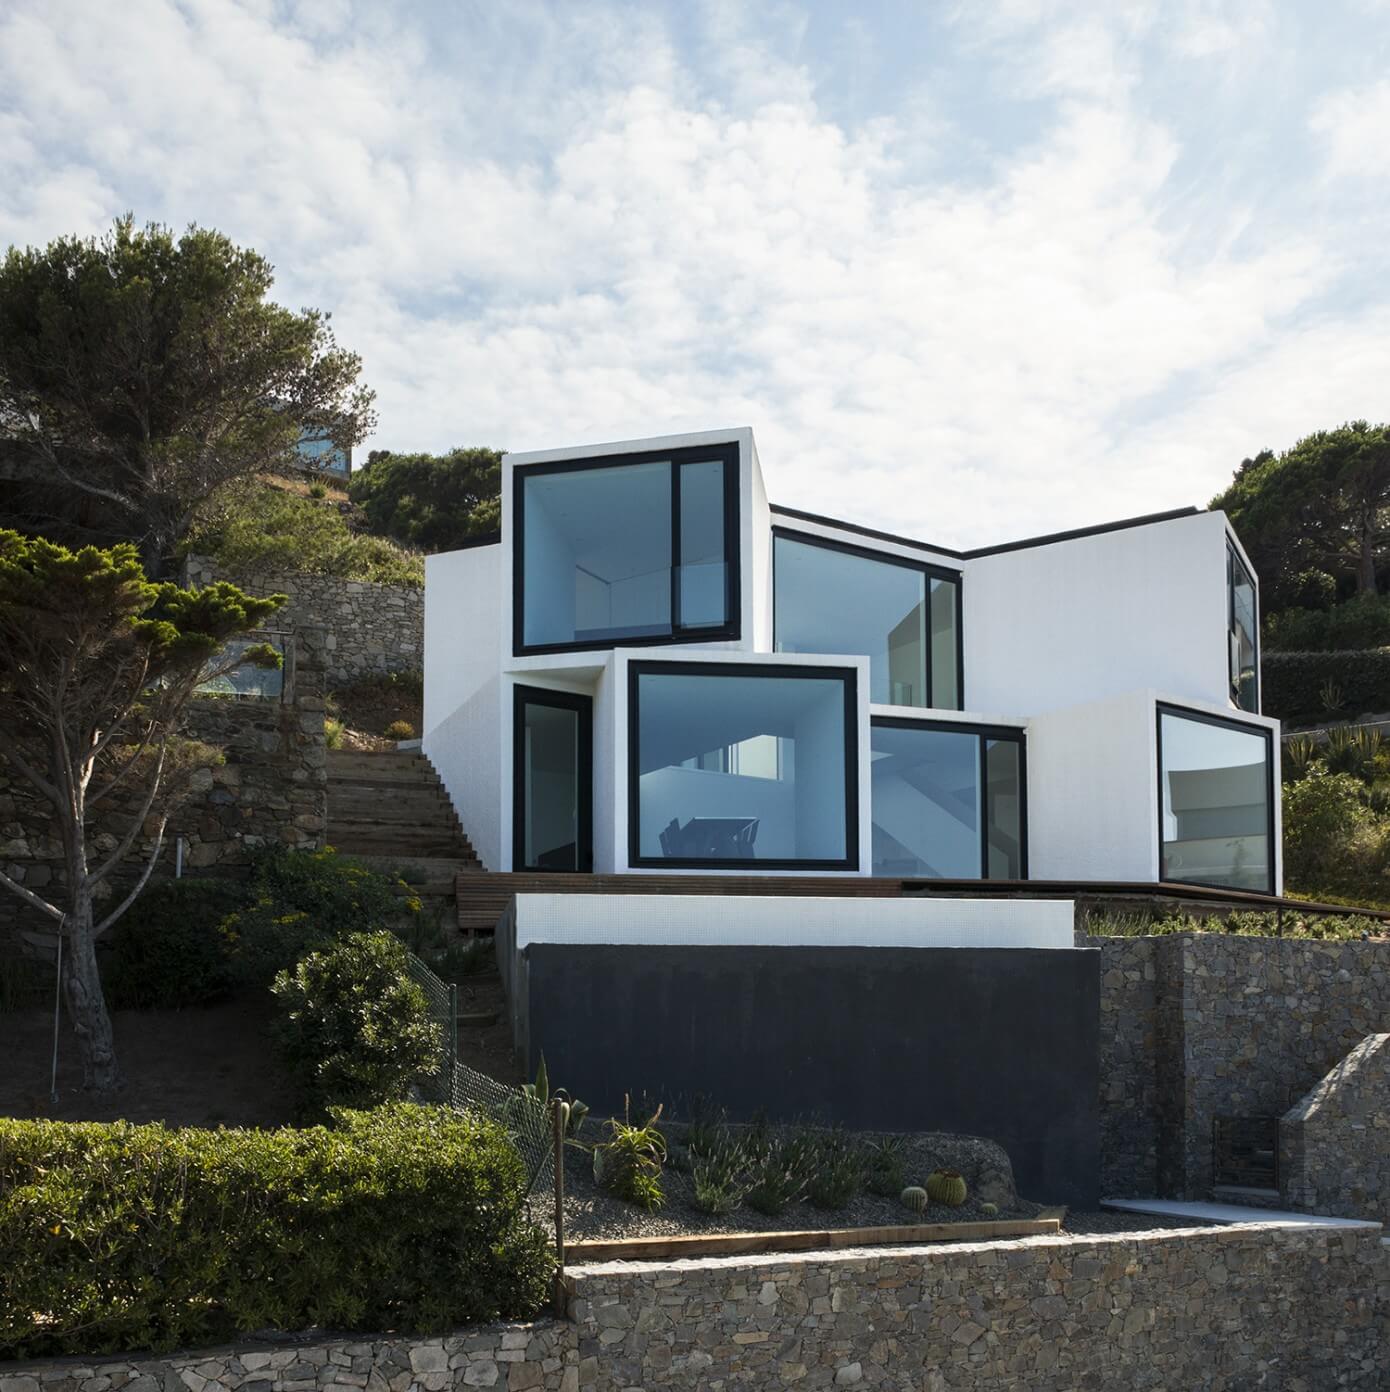 Sunflower House by Cadaval & Solà-Morales